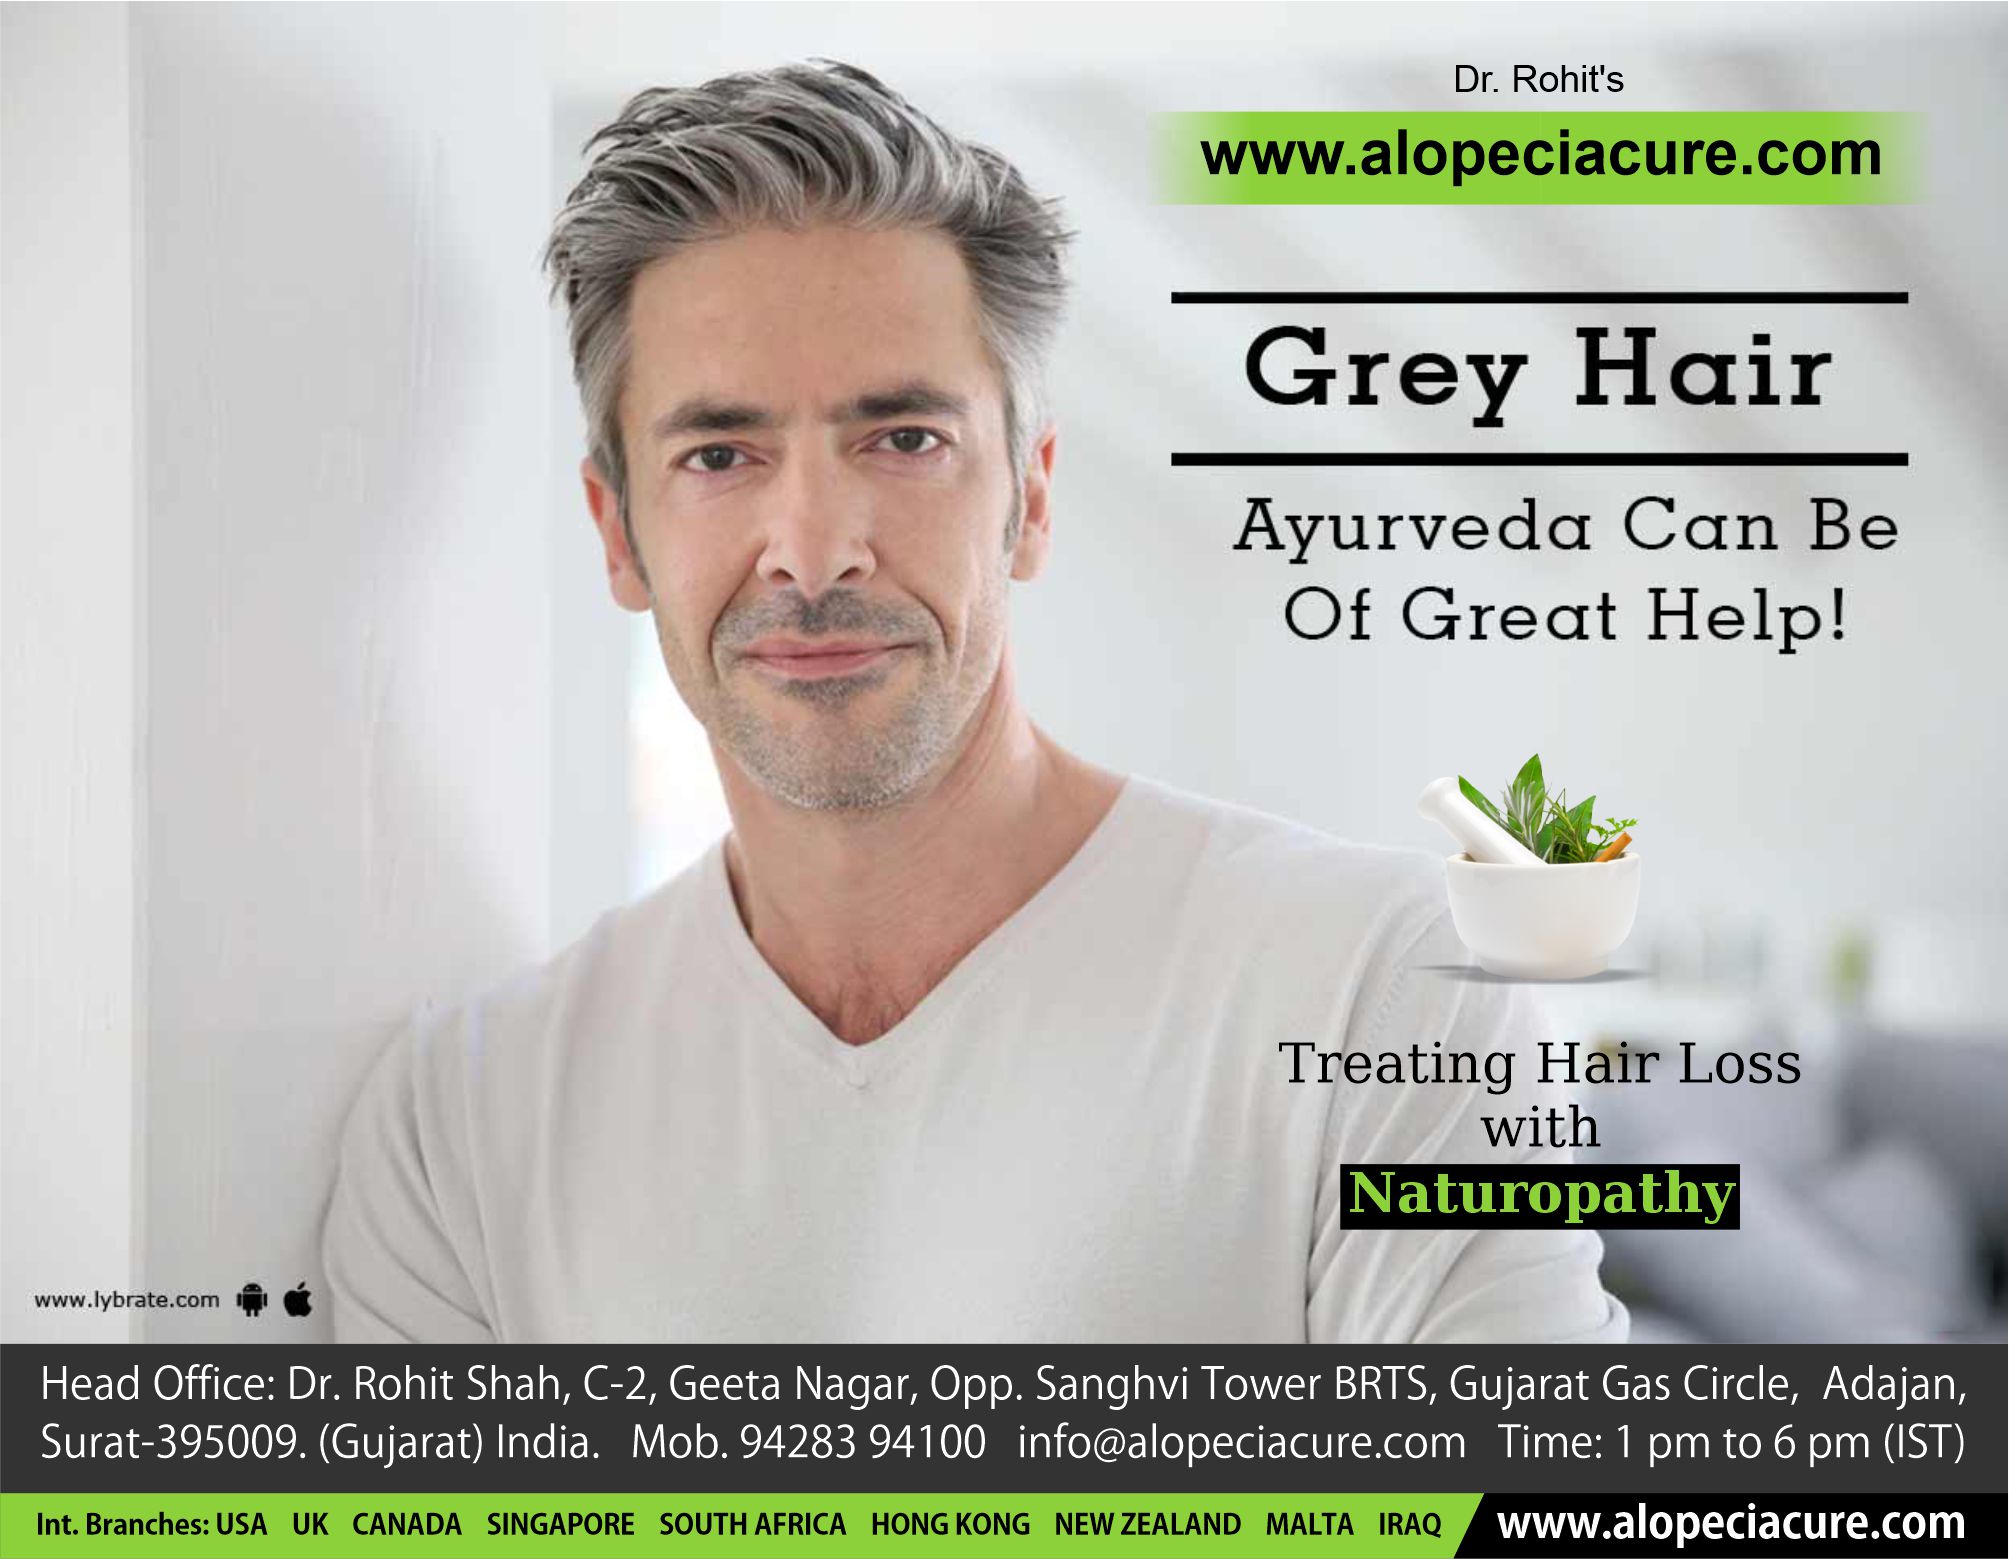 Grey Hair - Ayurveda Can Be Of Great Help!